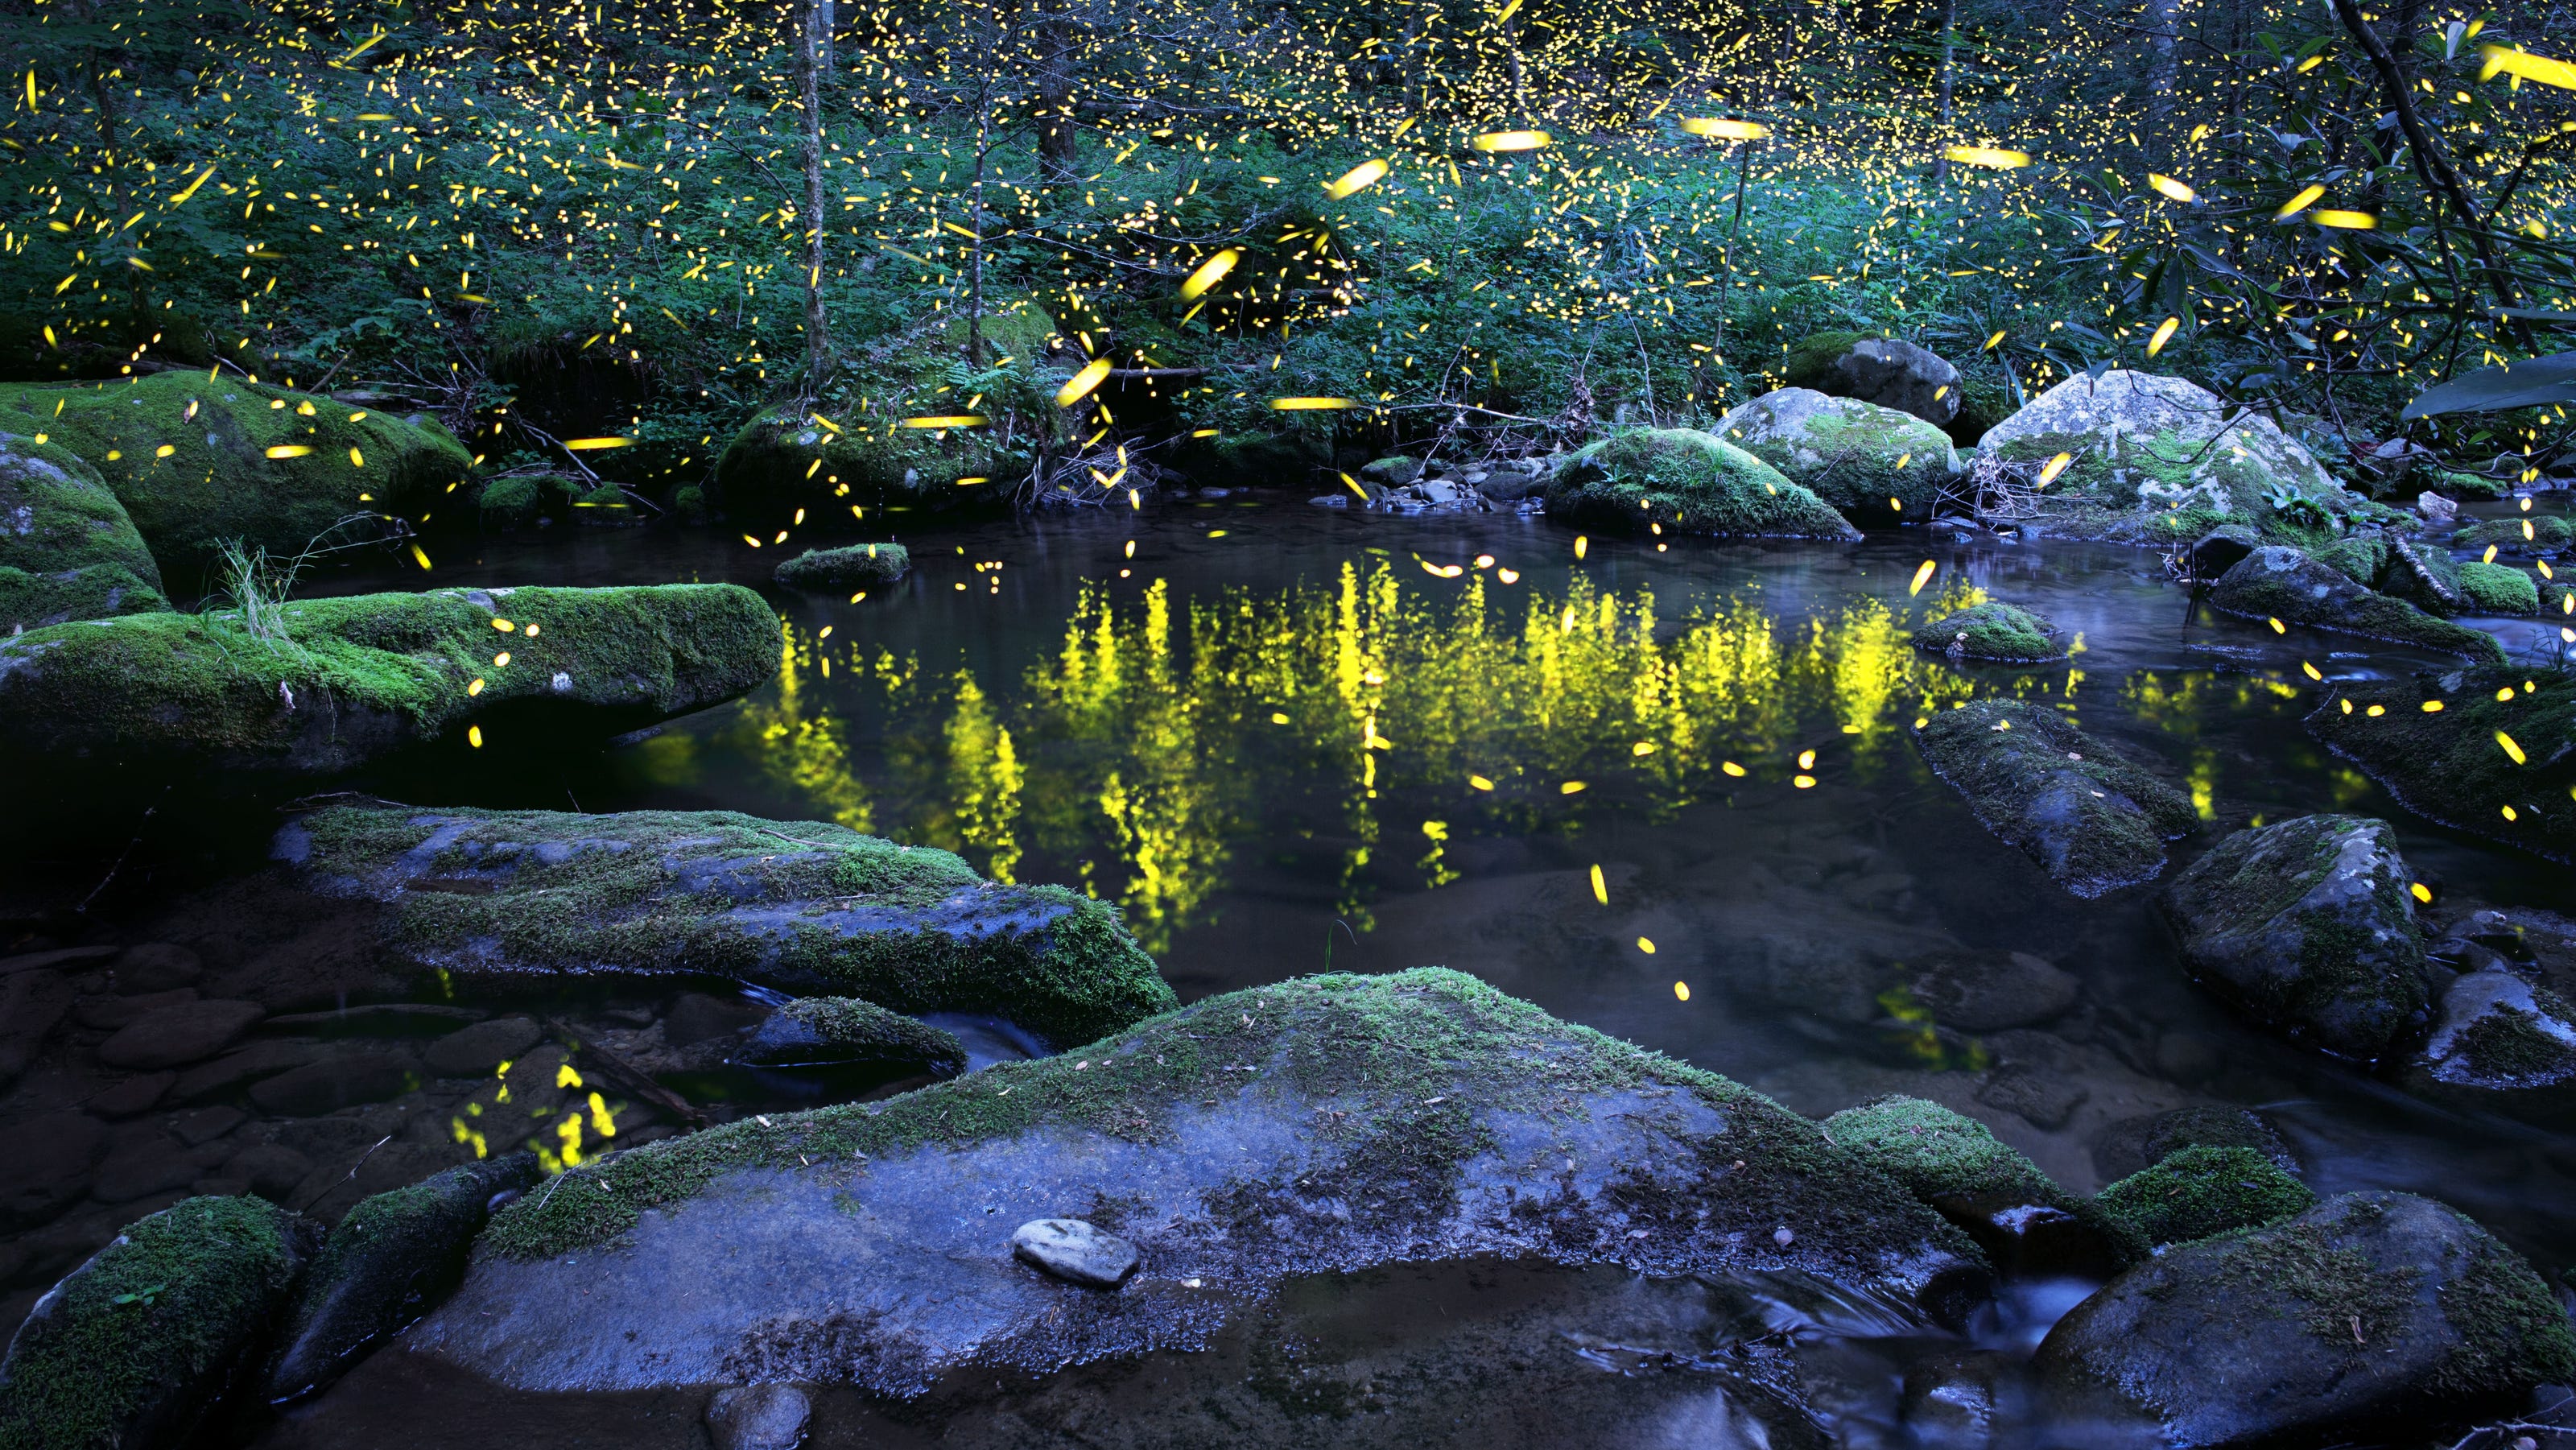 Word from the Smokies: Synchronous fireflies light up the night